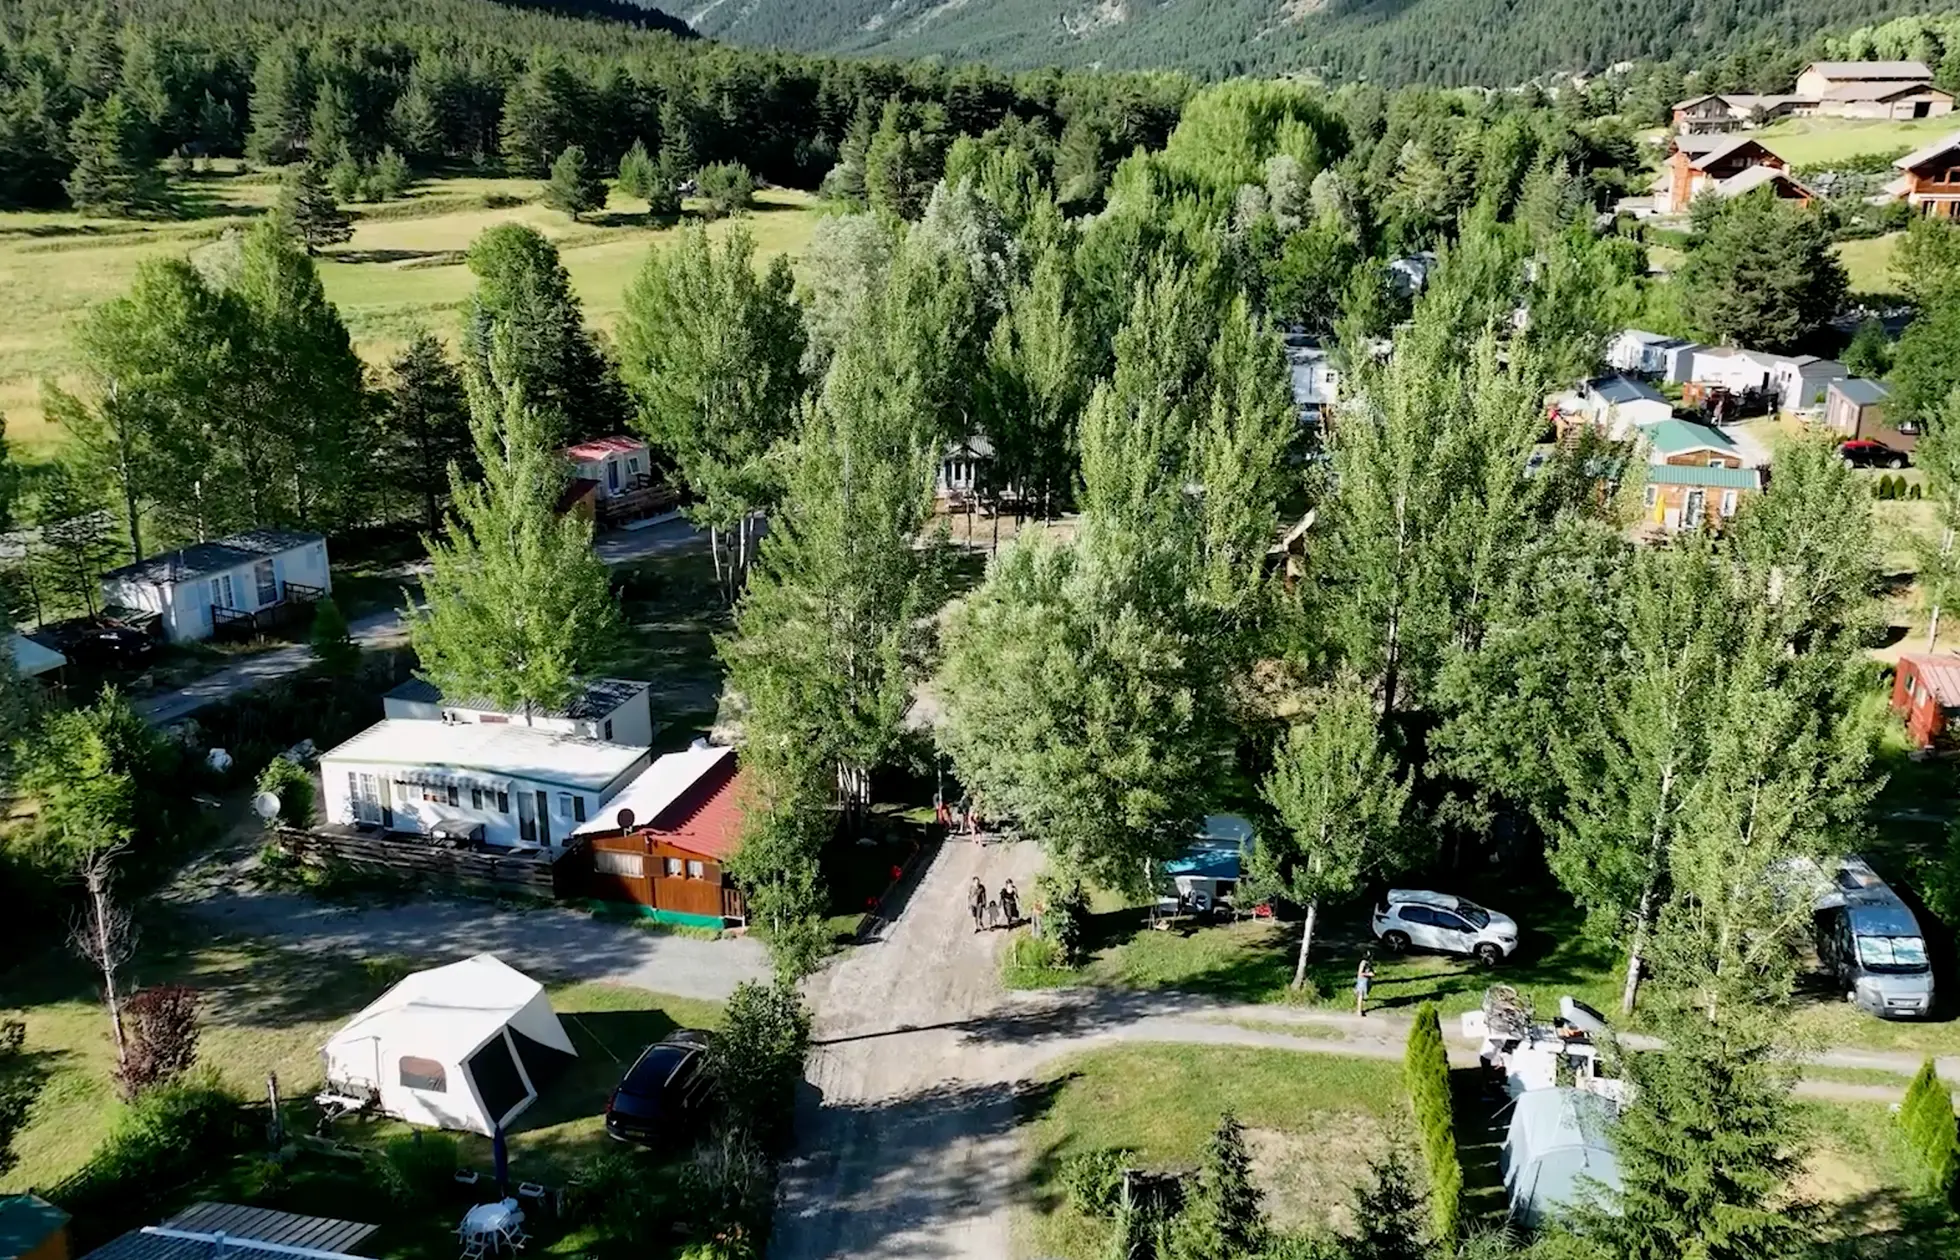 Camping Le Montana - Situation 1